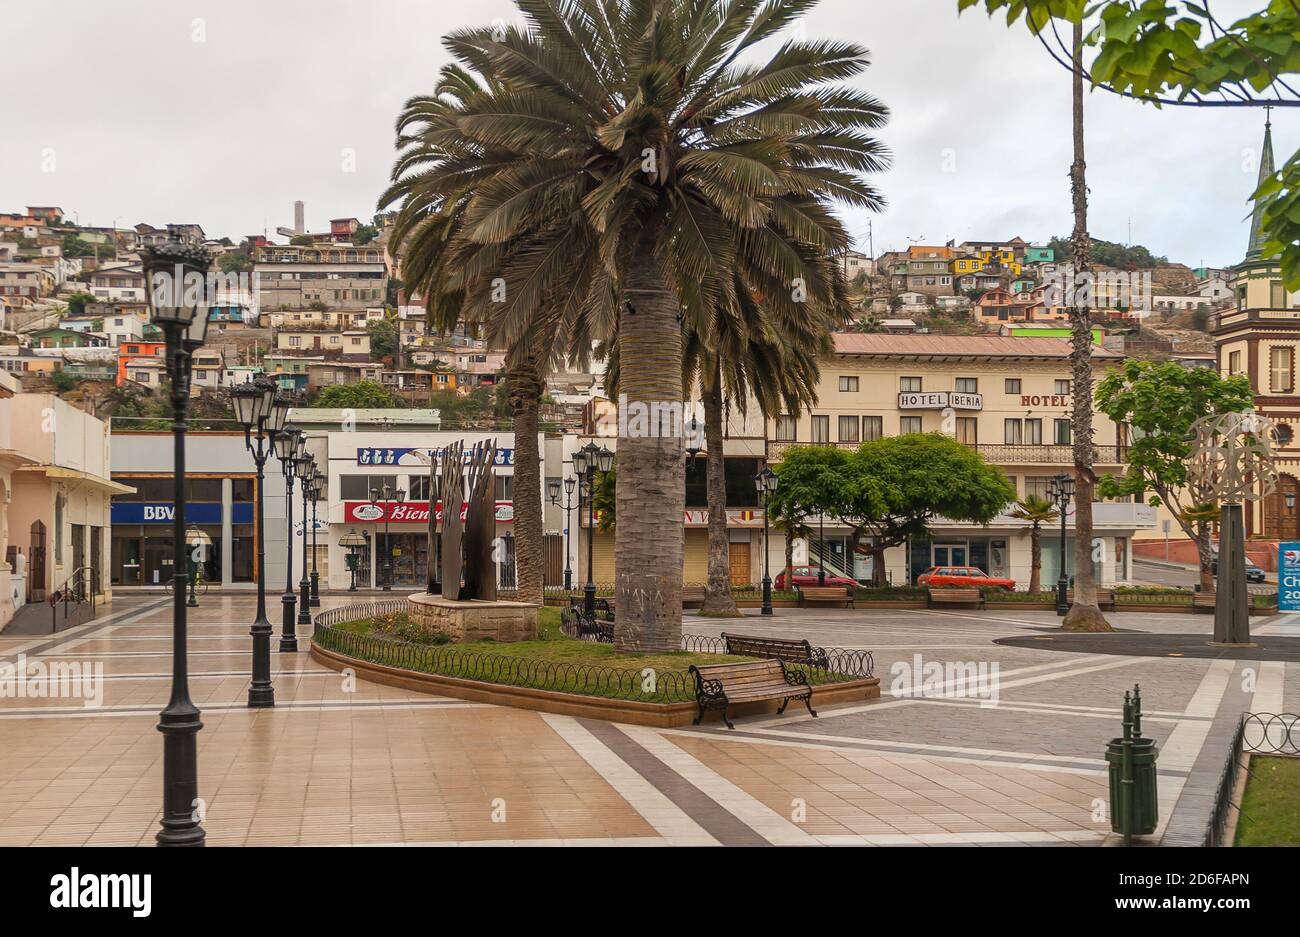 Coquimbo, Chile - December 7, 2008: Early morning on Plaza de Armas showing Hotel Ibiza and its neighbors. Big green palm tree on empty square. Backdr Stock Photo